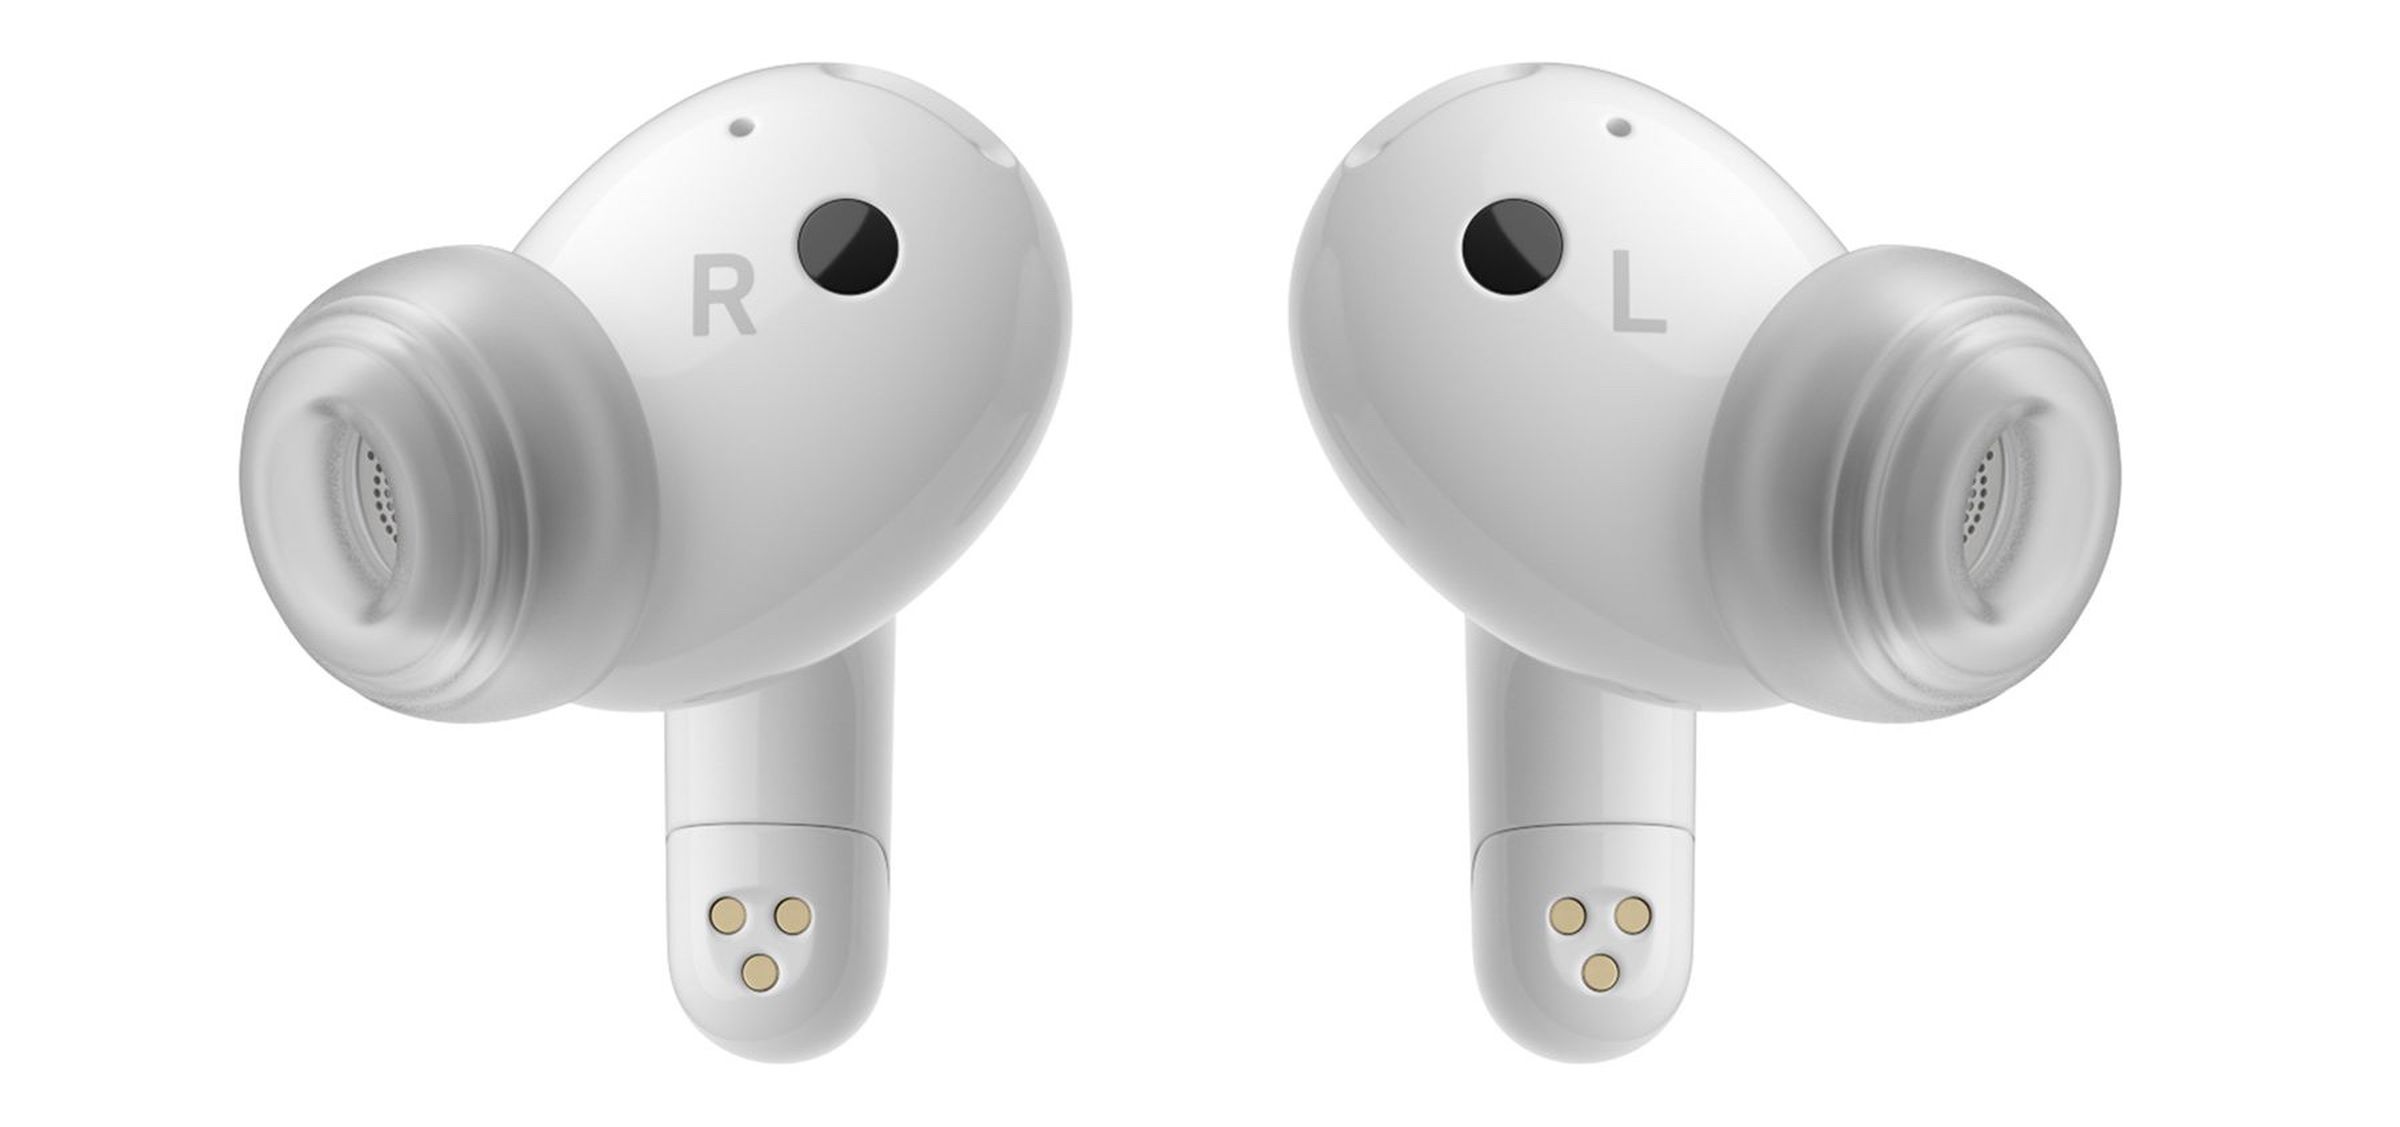 LG’s earbuds use hypoallergenic ear tips.